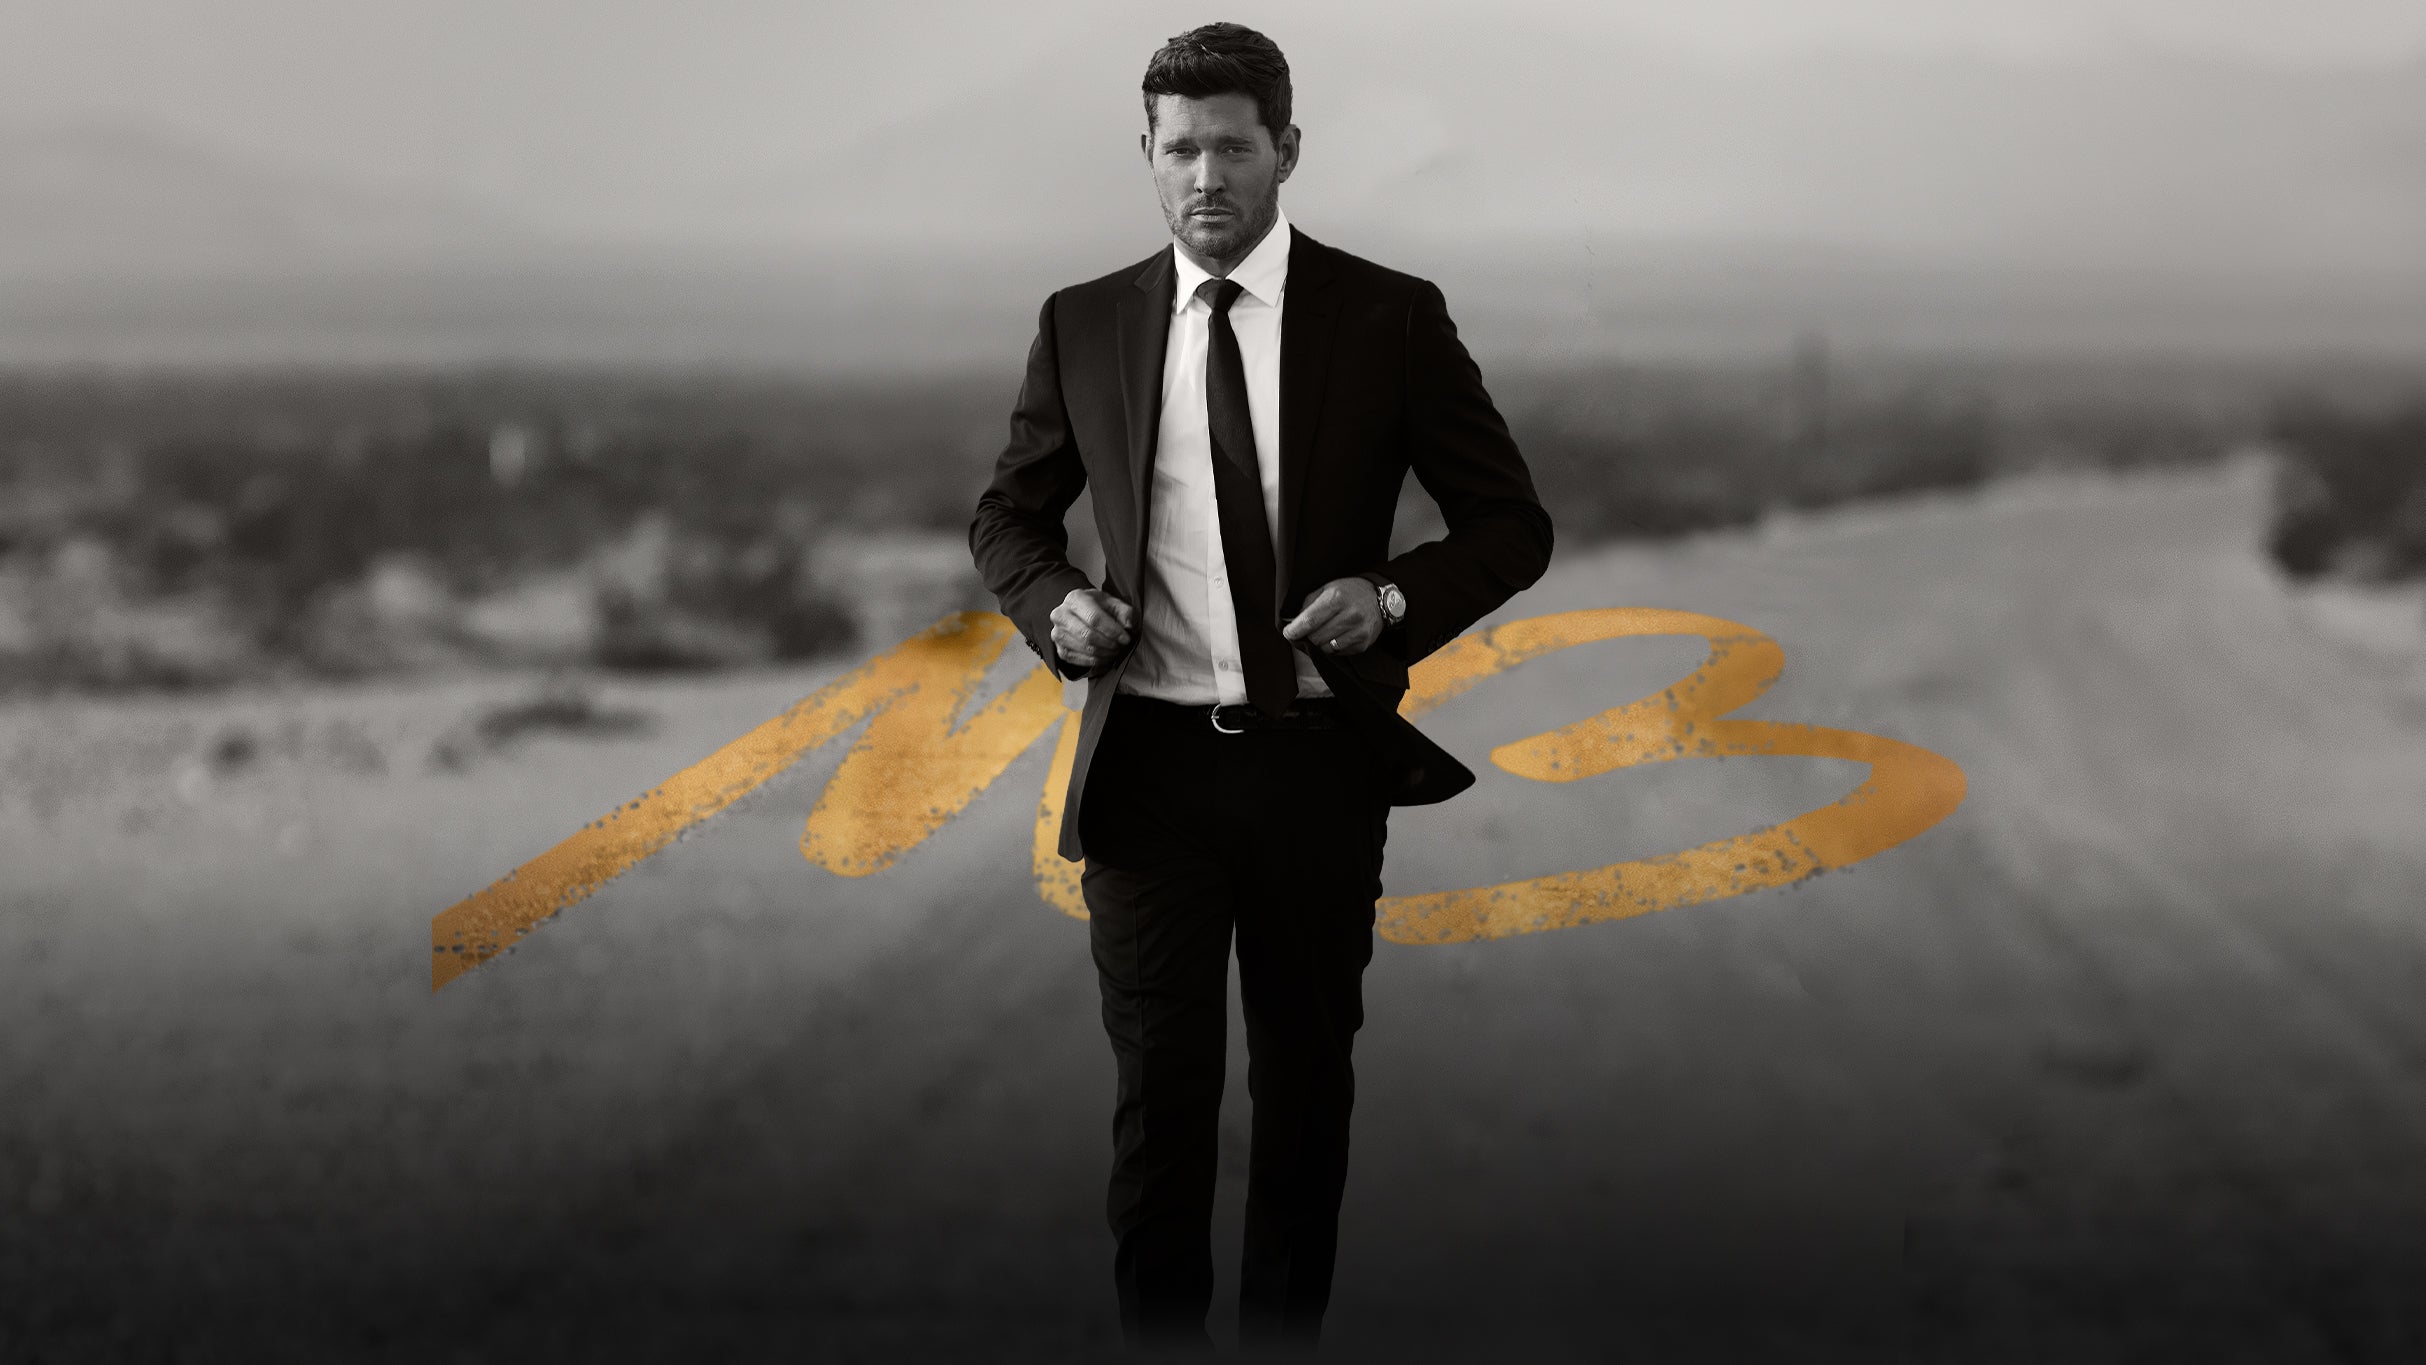 An Evening with Michael Bublé at Amway Center